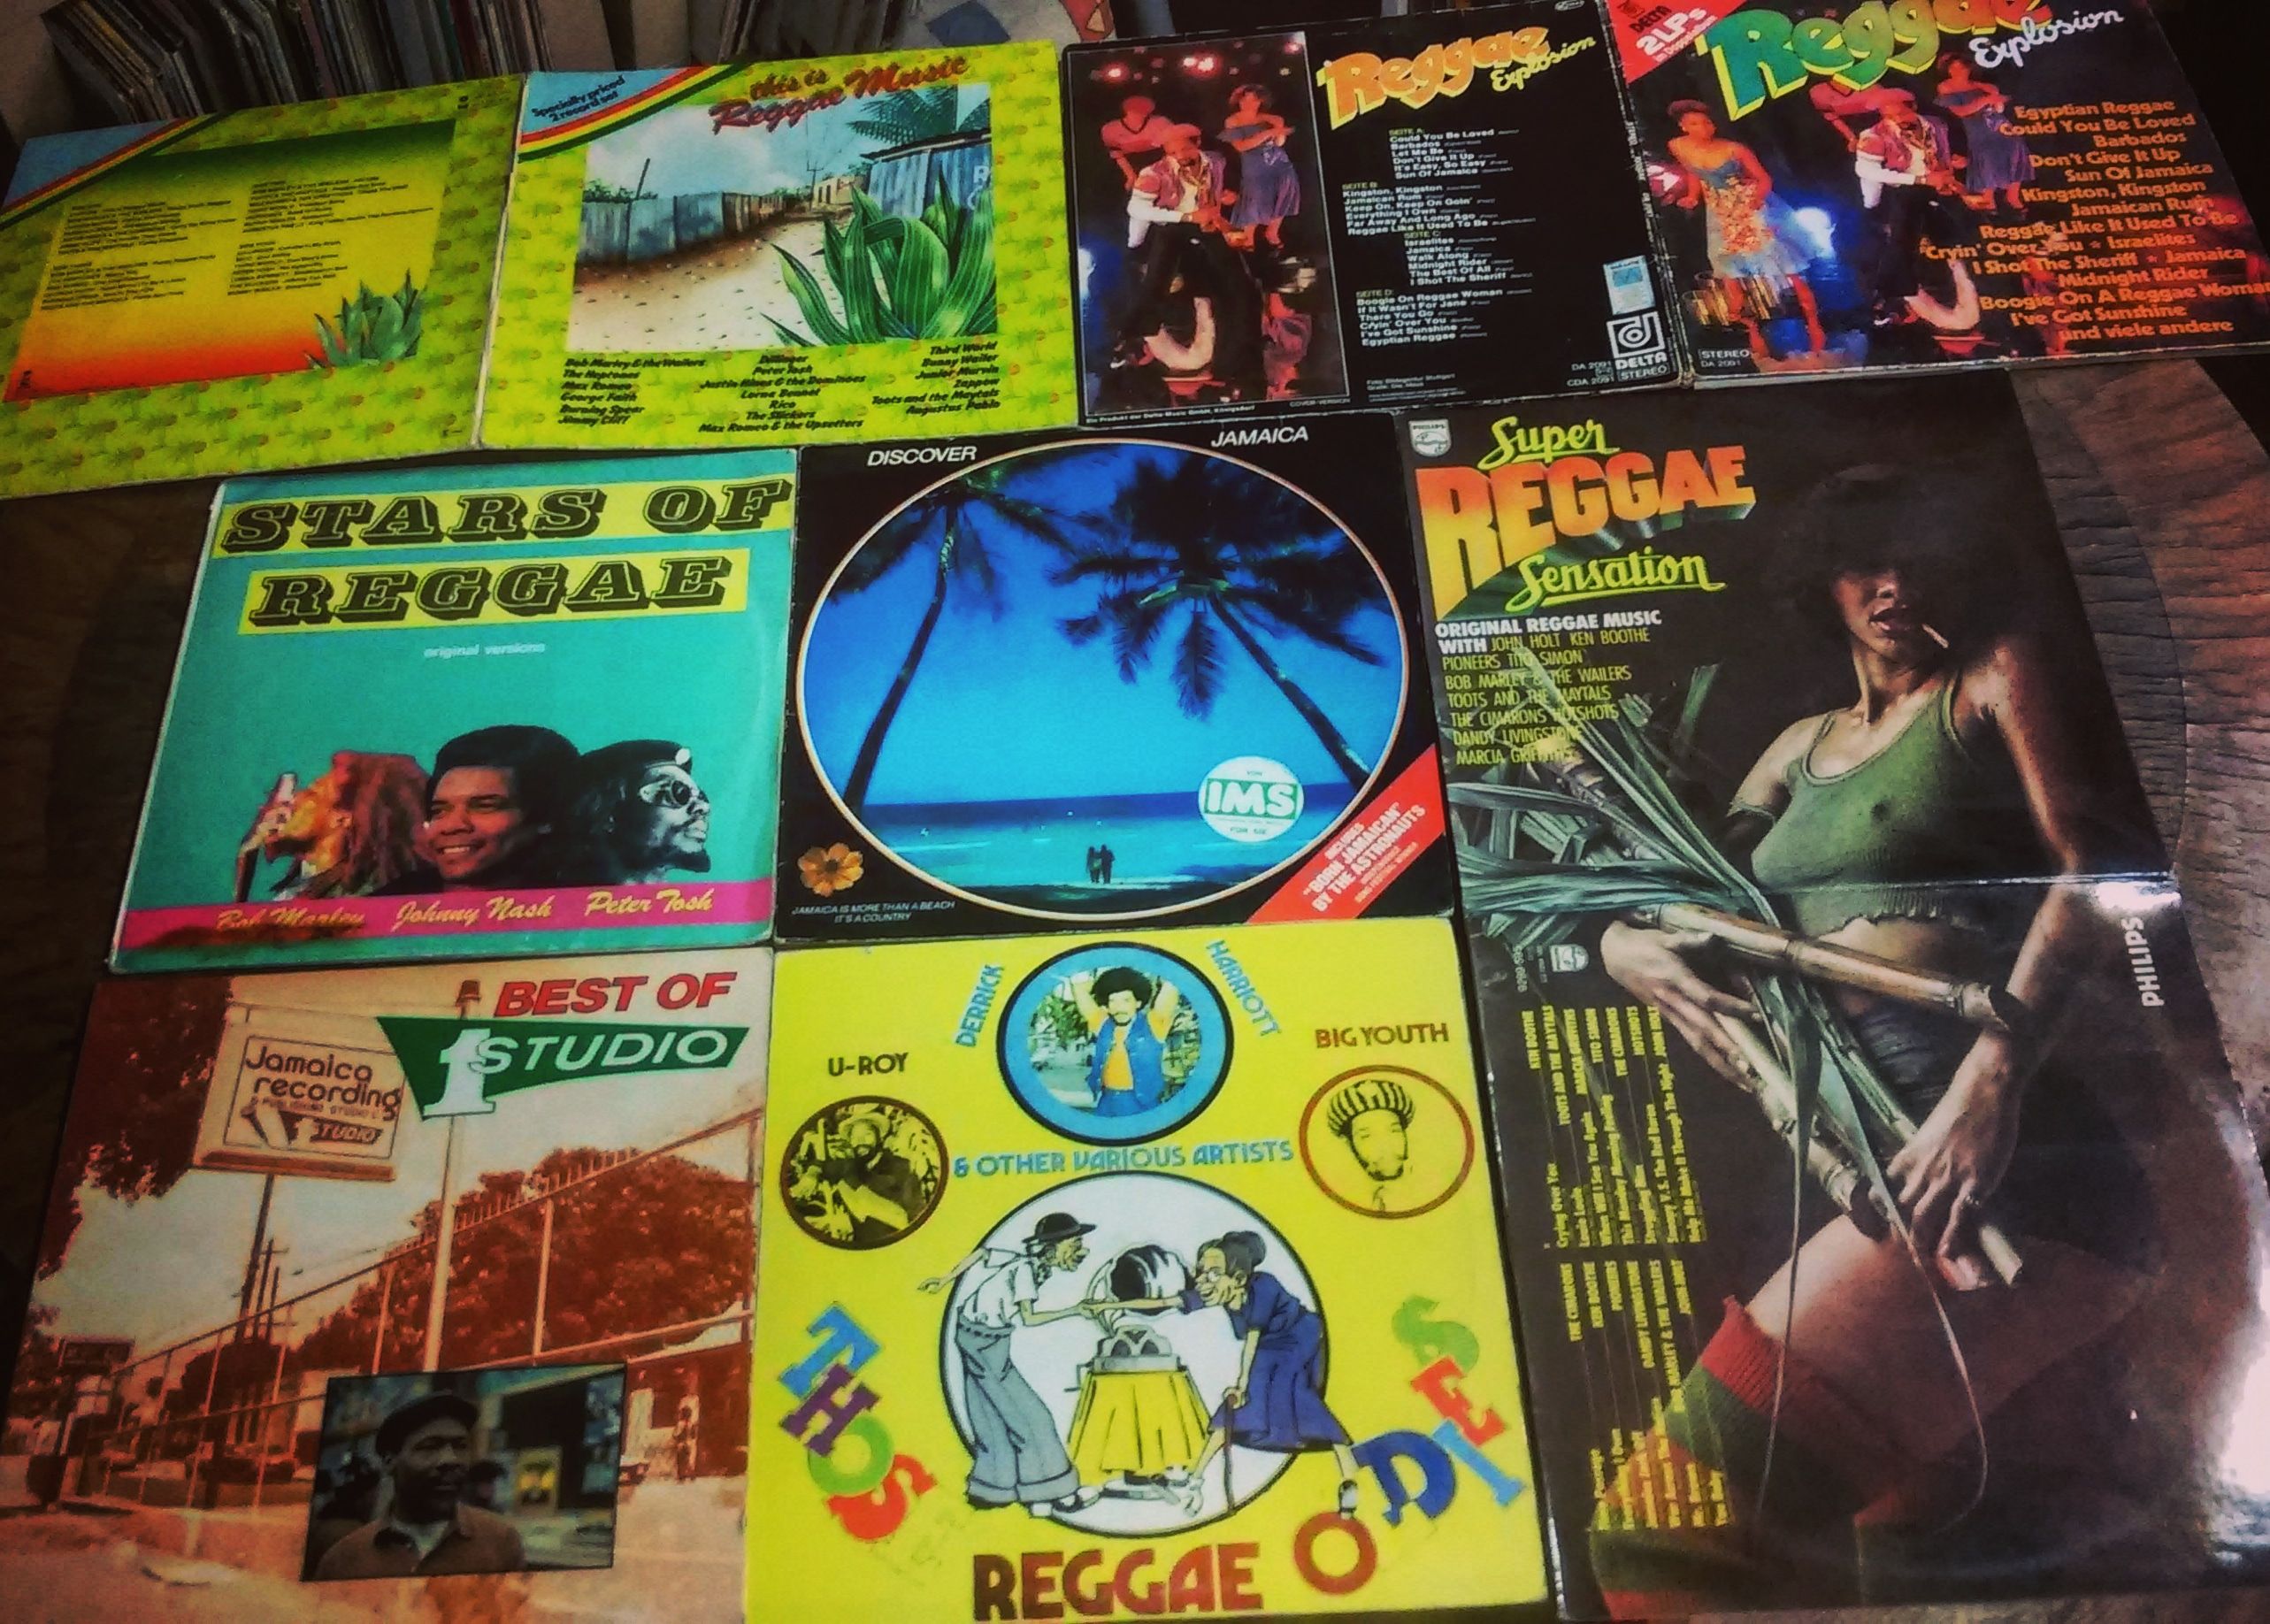 Reggae Like It Used To Be - cheap (or not so cheap) compilations